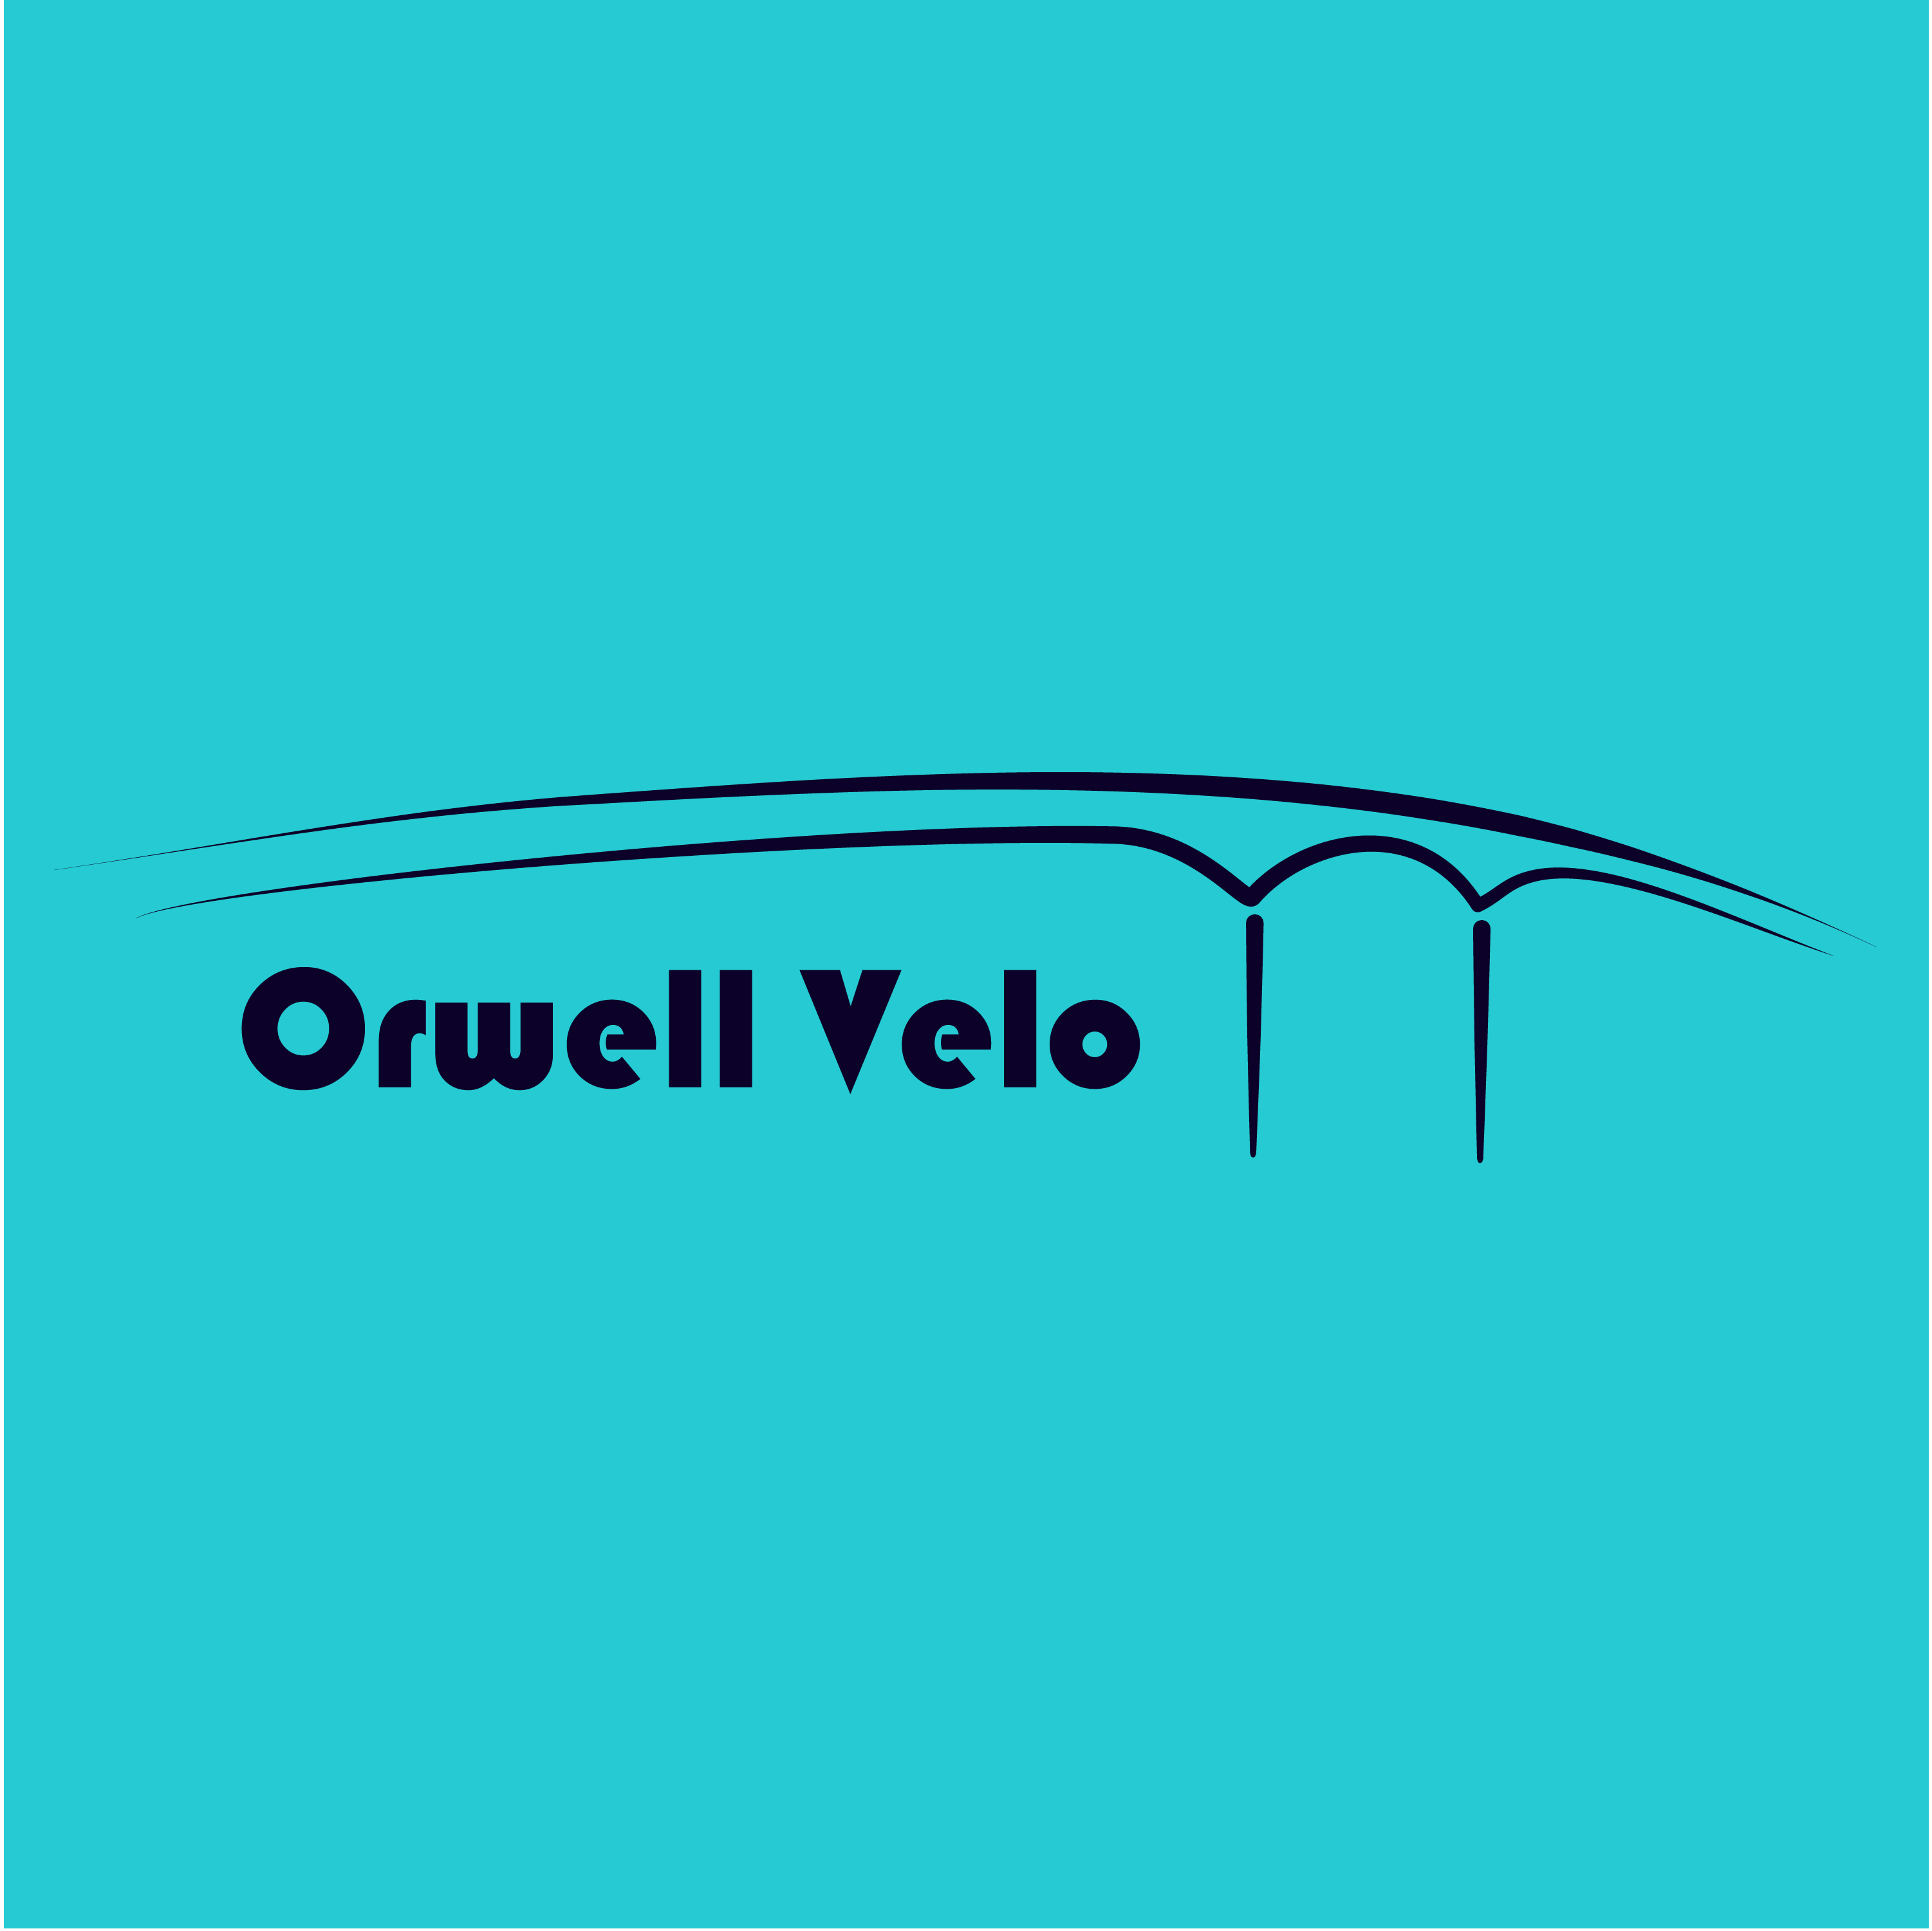 Club Image for ORWELL VELO